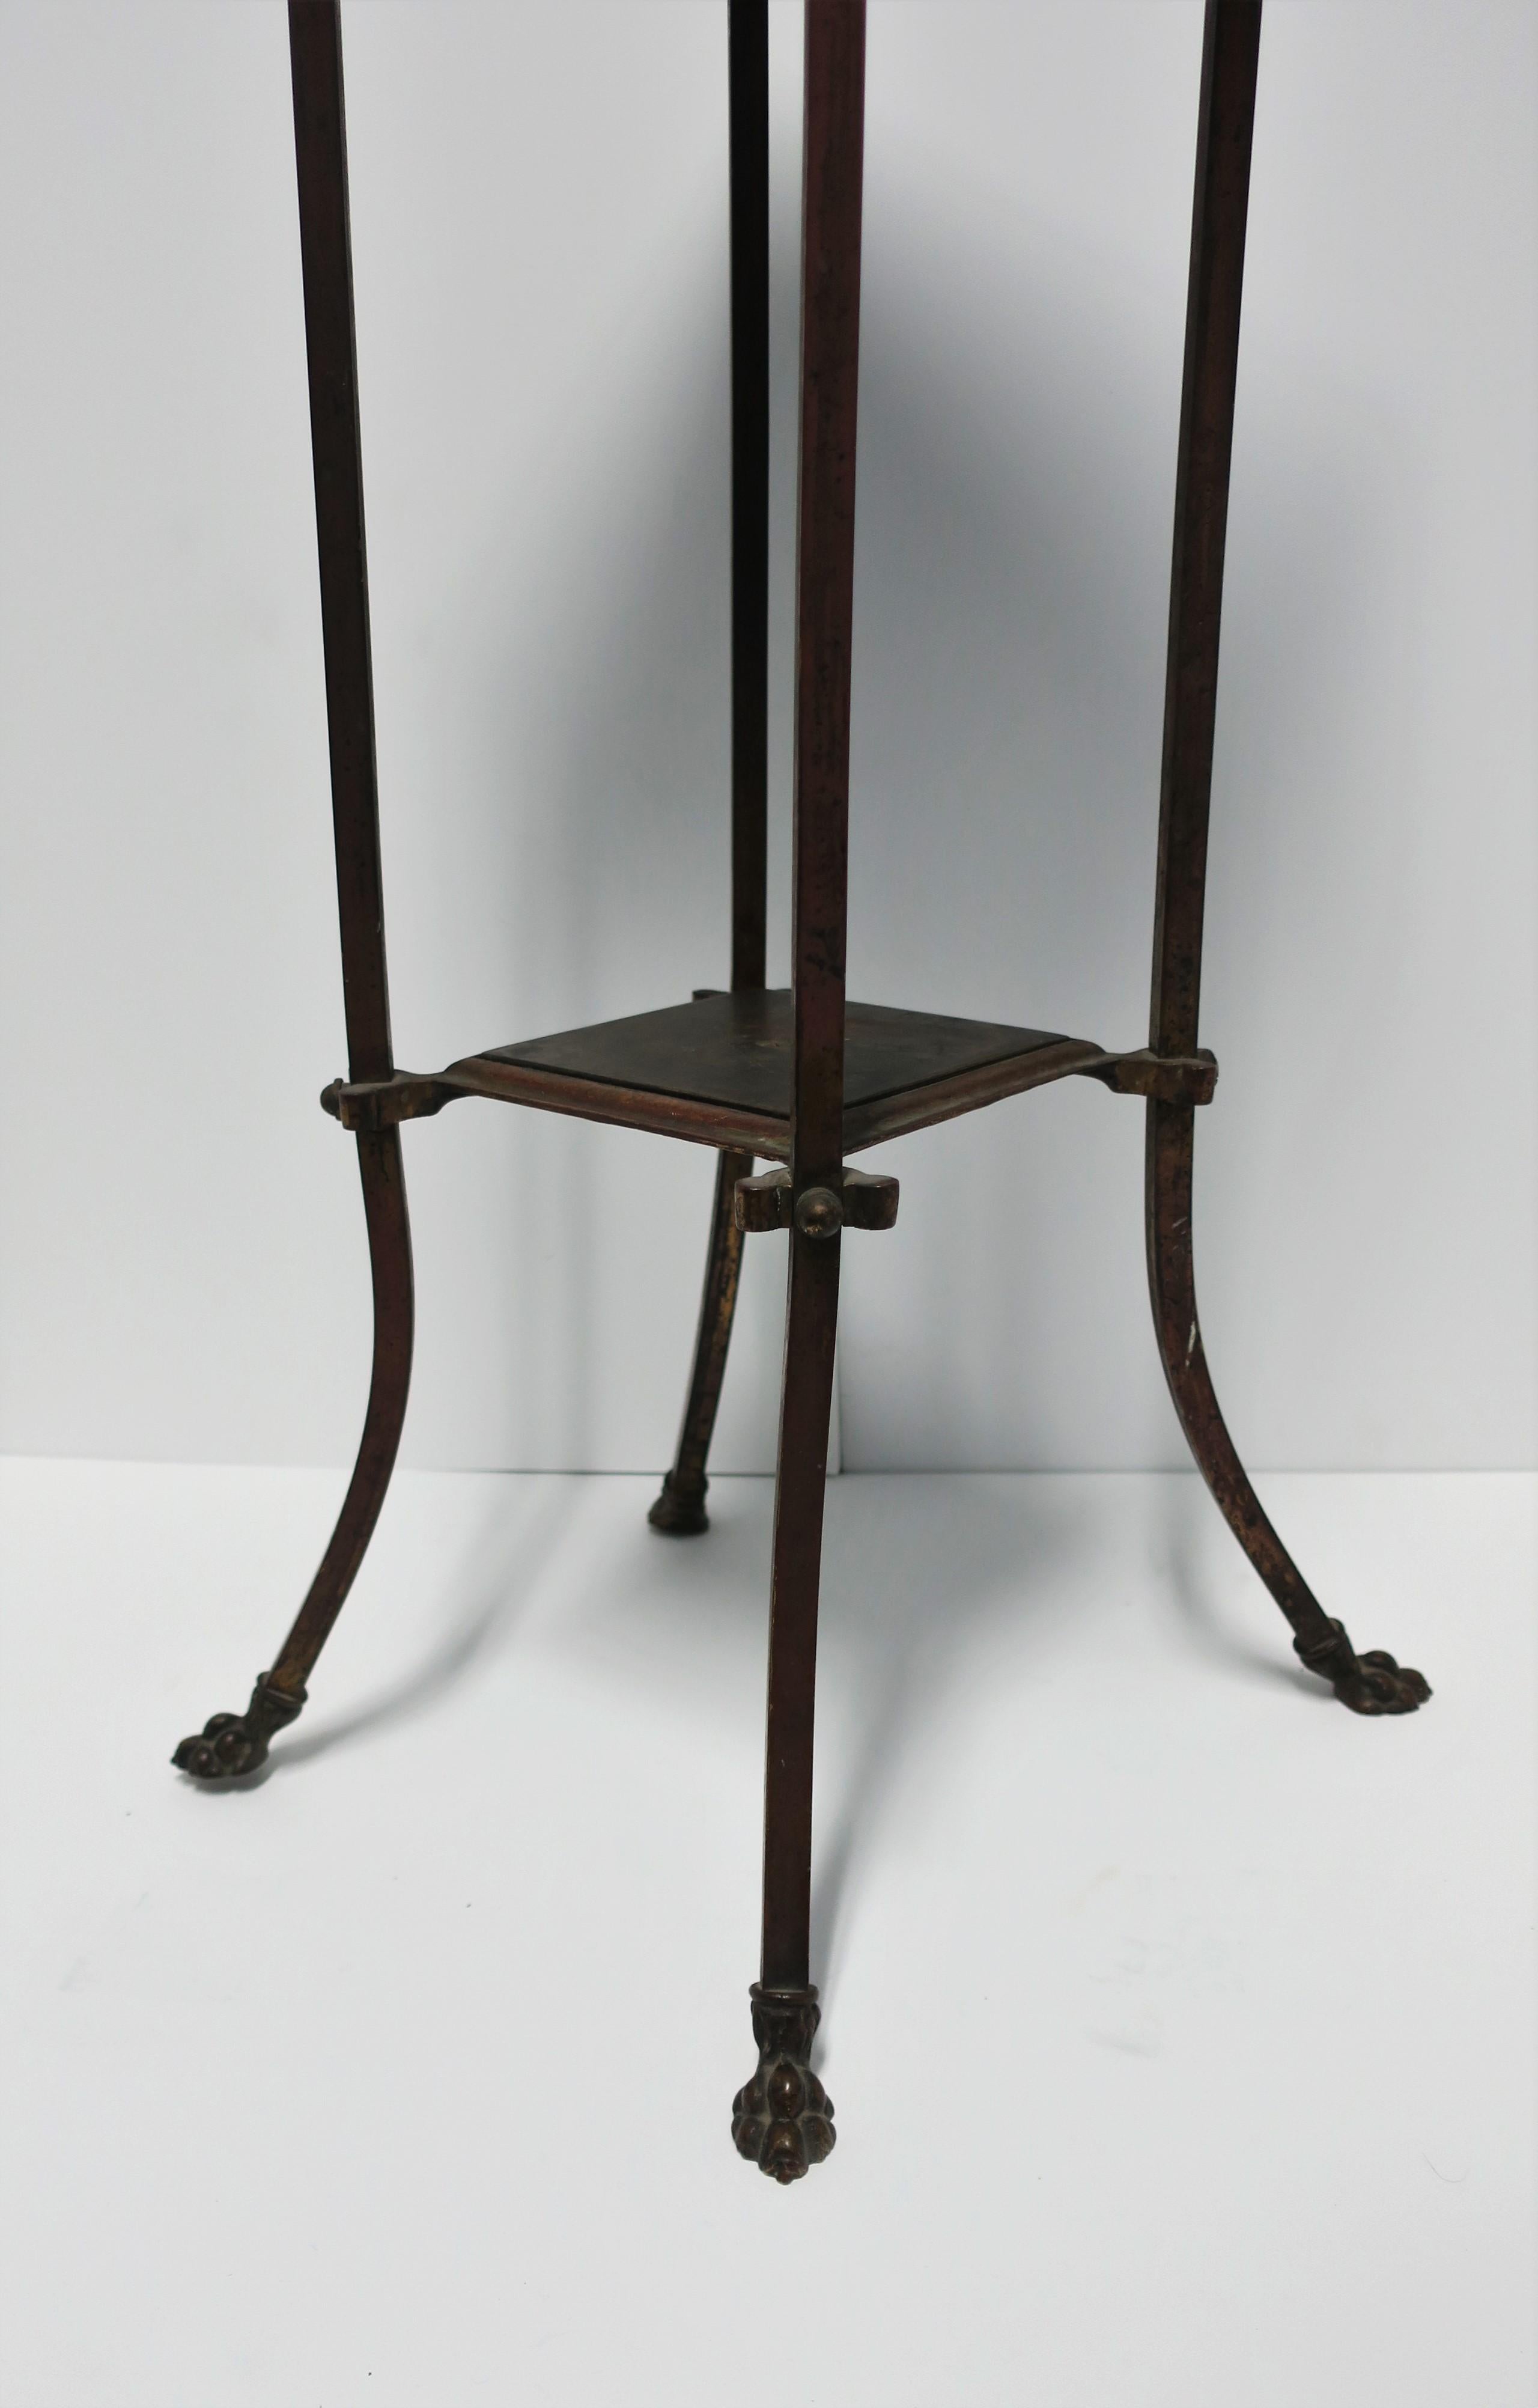 American Bronze Pedestal Table with Shelf and Decorative Paw Feet, circa 19th Century